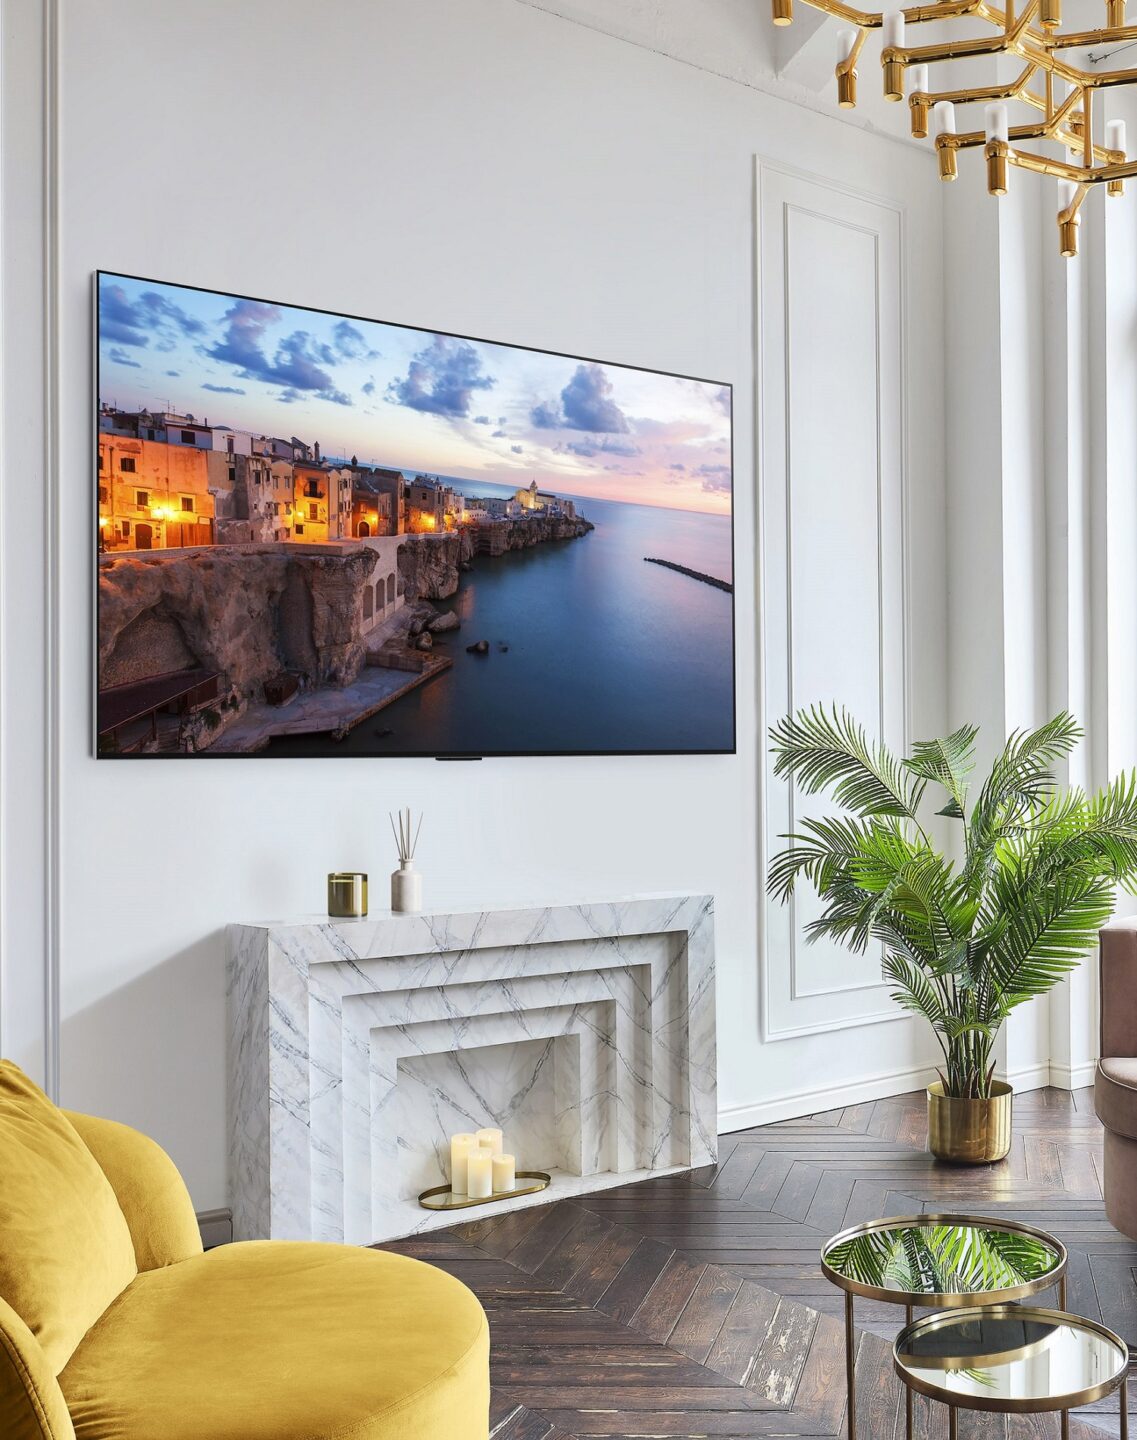 LG OLED TVs at CES 2023: updates to the Z3, G3 and C3 lines